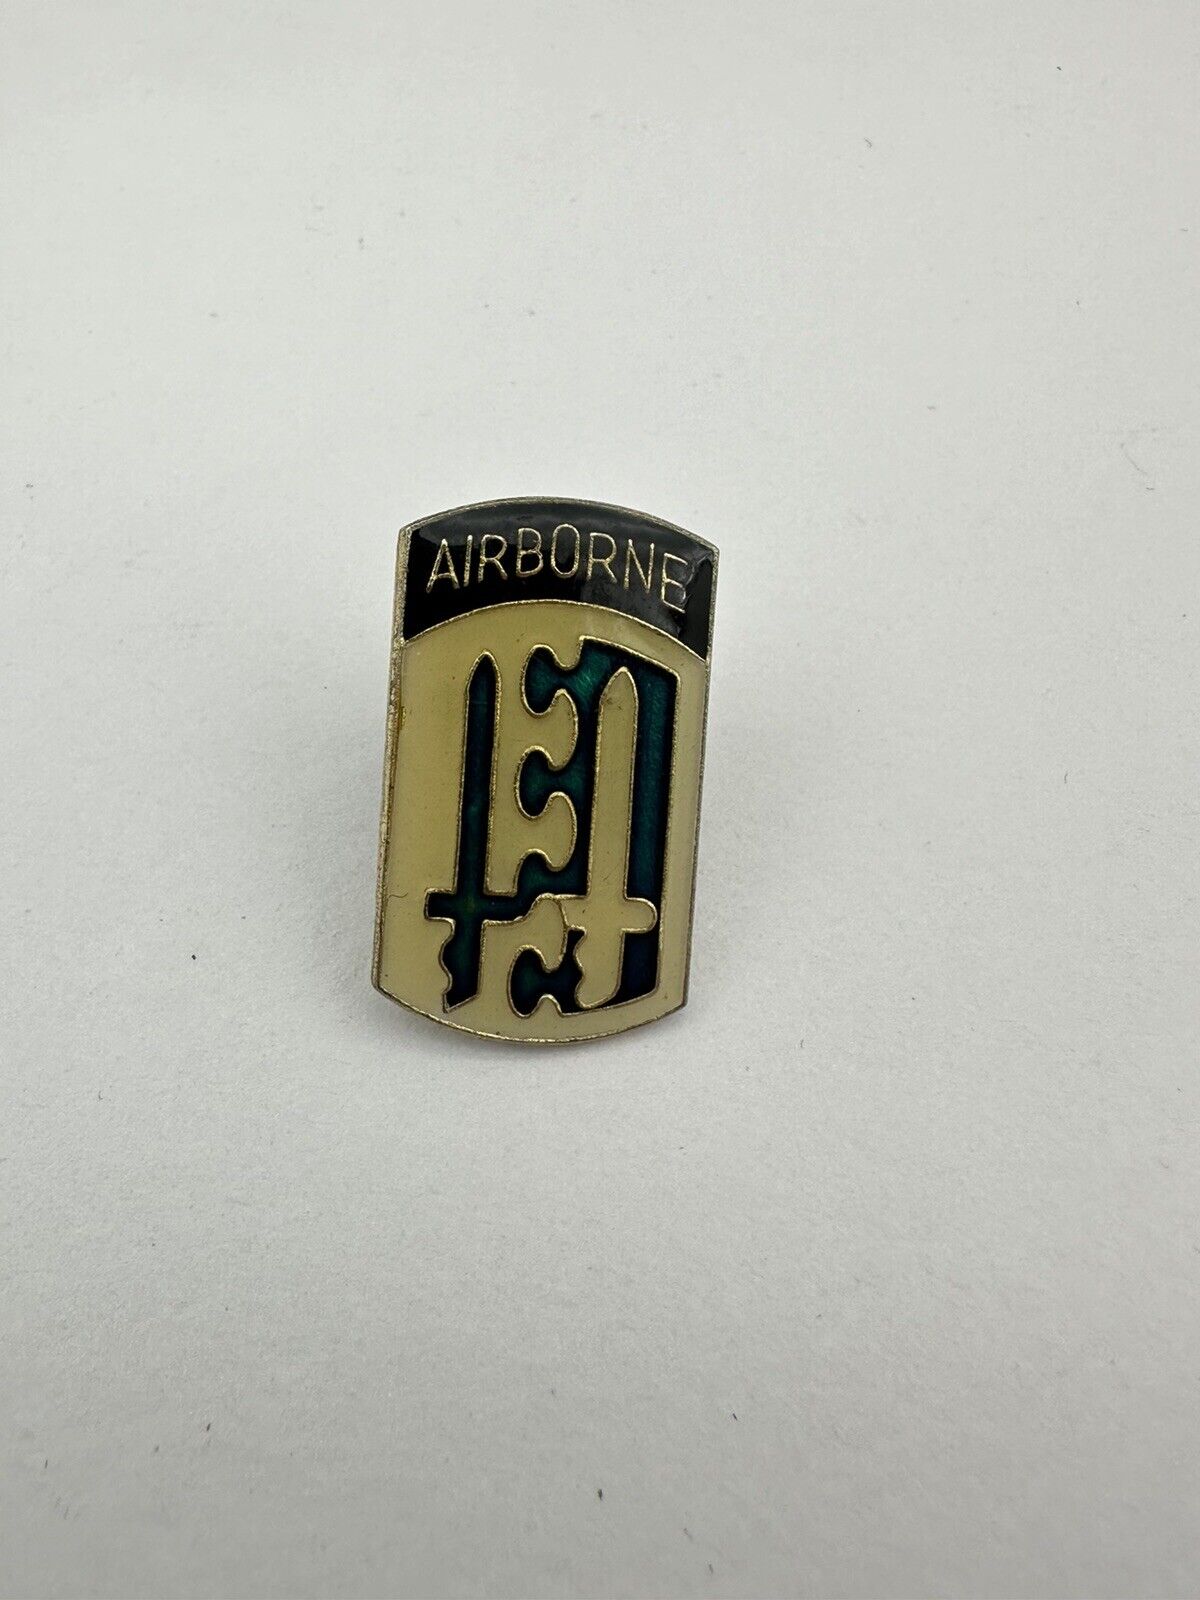 2ND INFANTRY BRIGADE AIRBORNE DIVISION US ARMY MILITARY LAPEL PIN BADGE